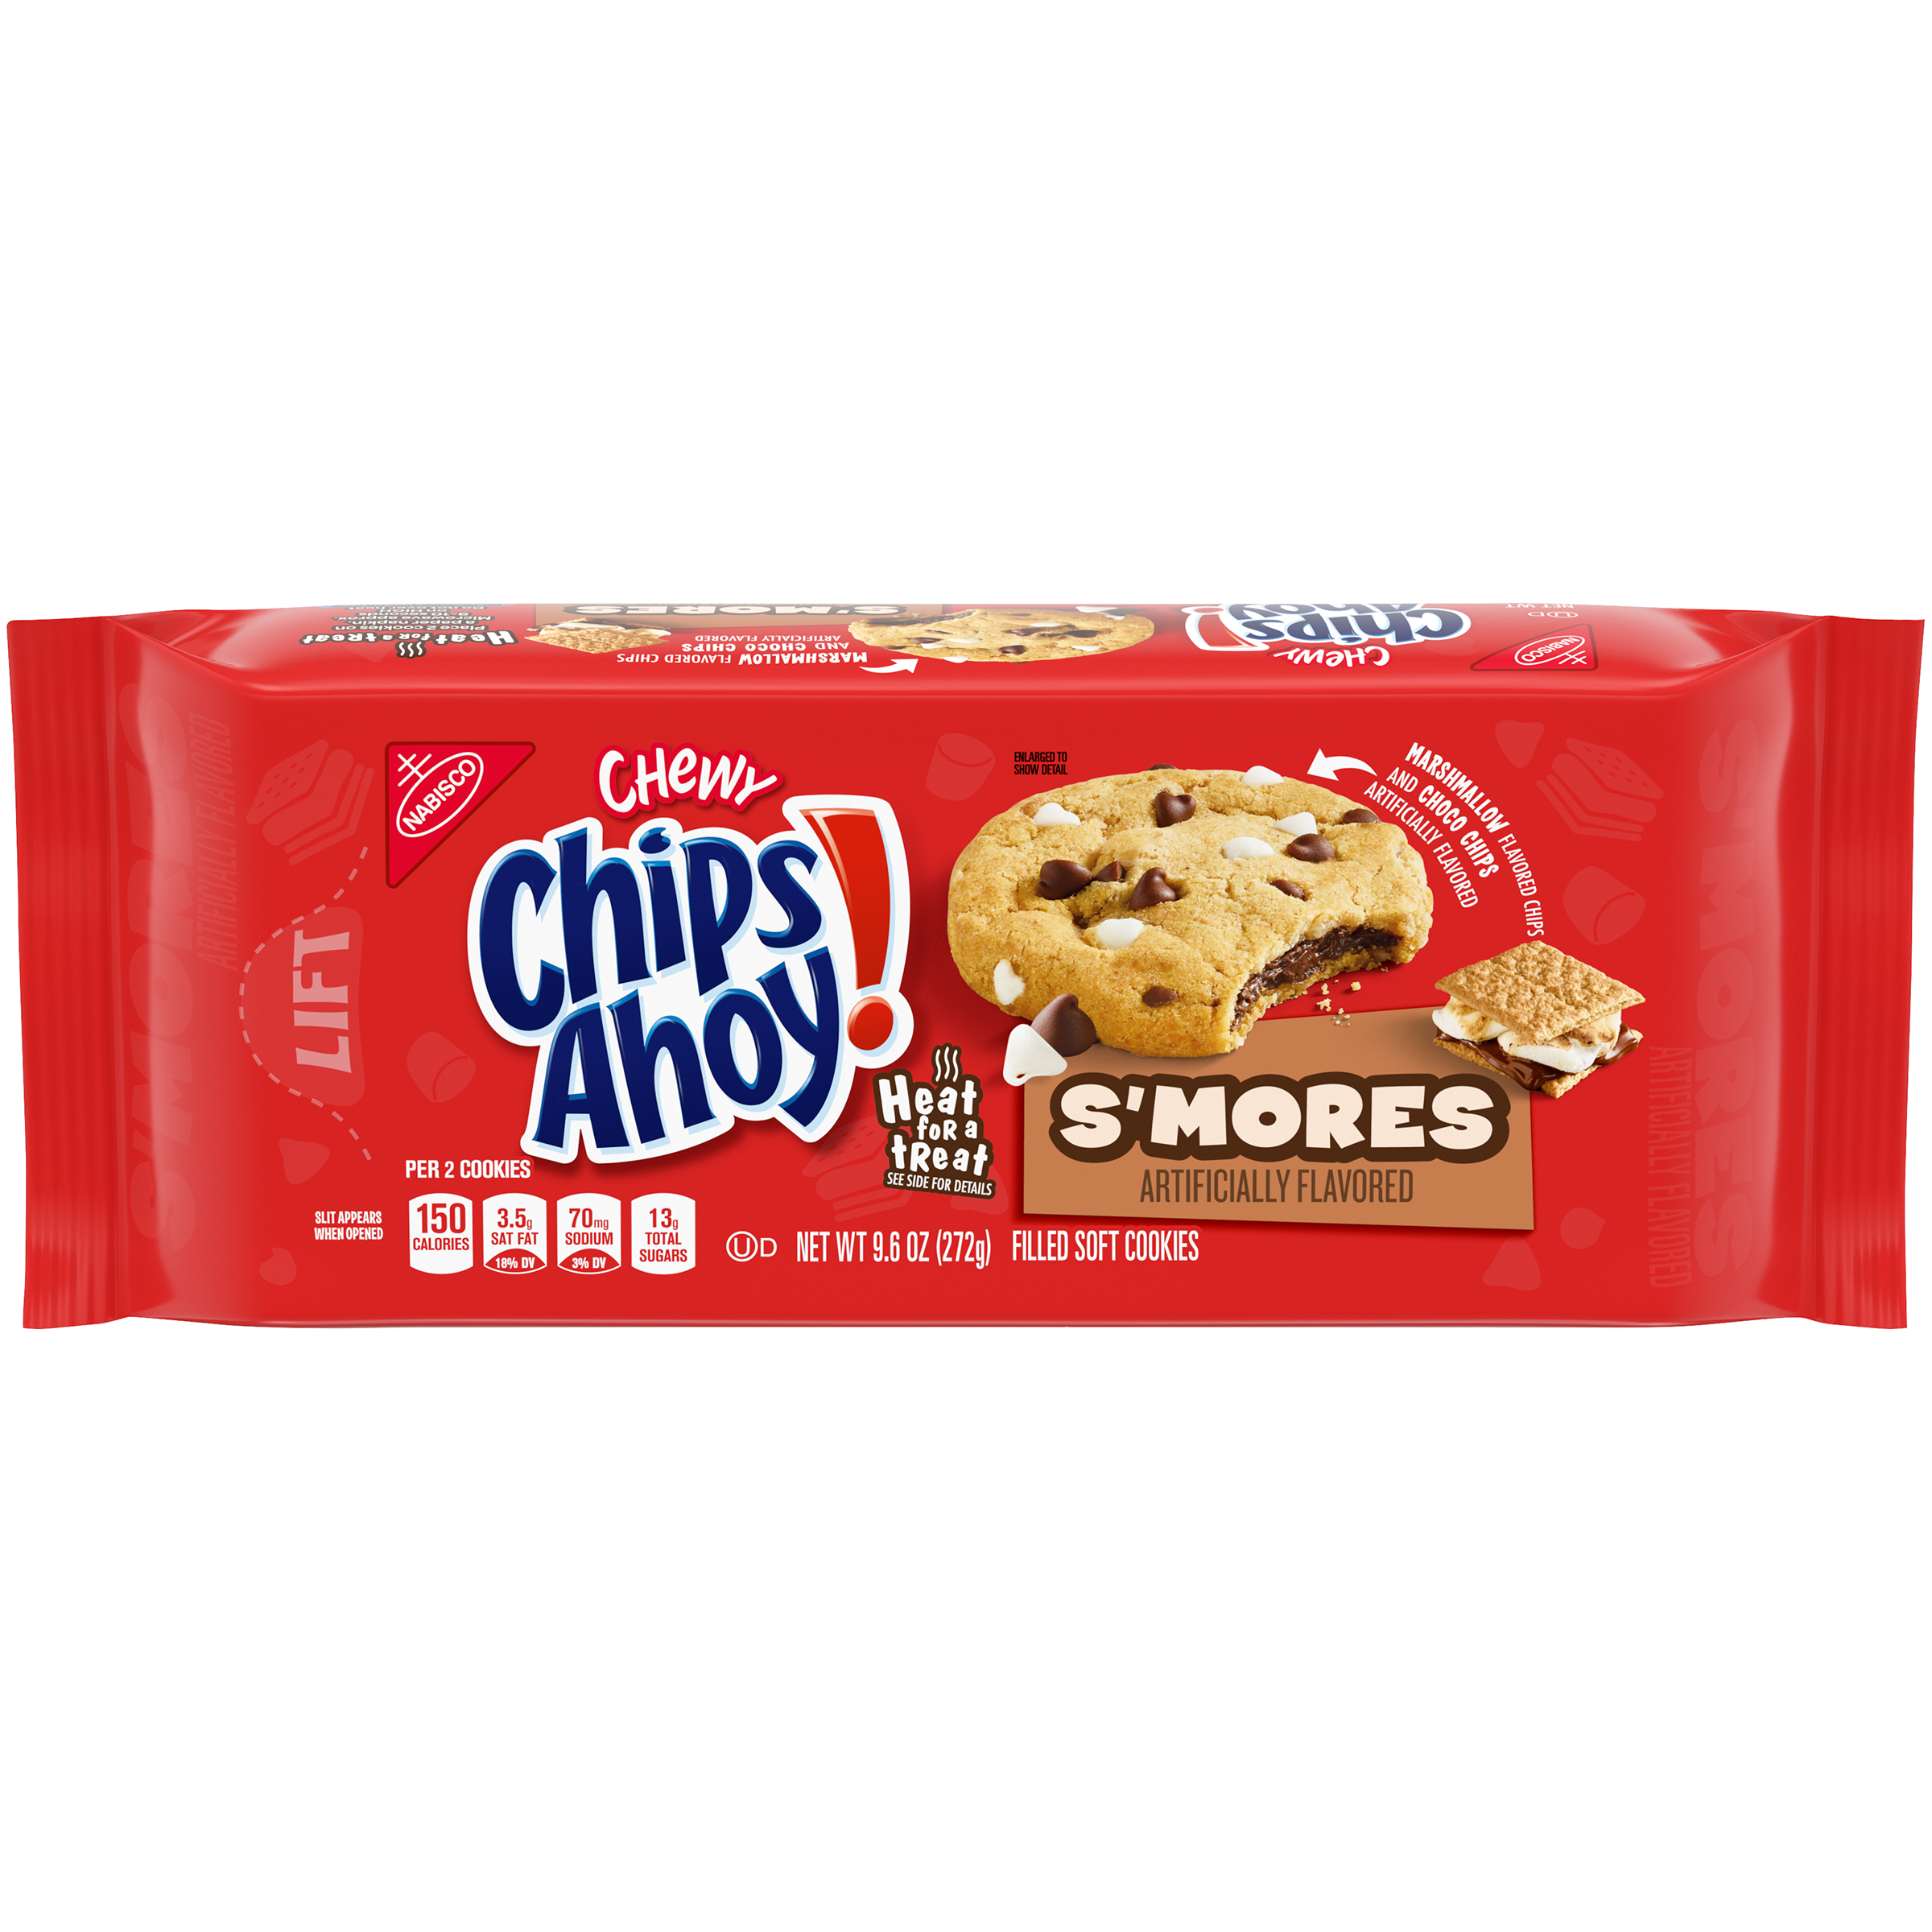 CHIPS AHOY! Chewy Smores Cookies 9.6 oz